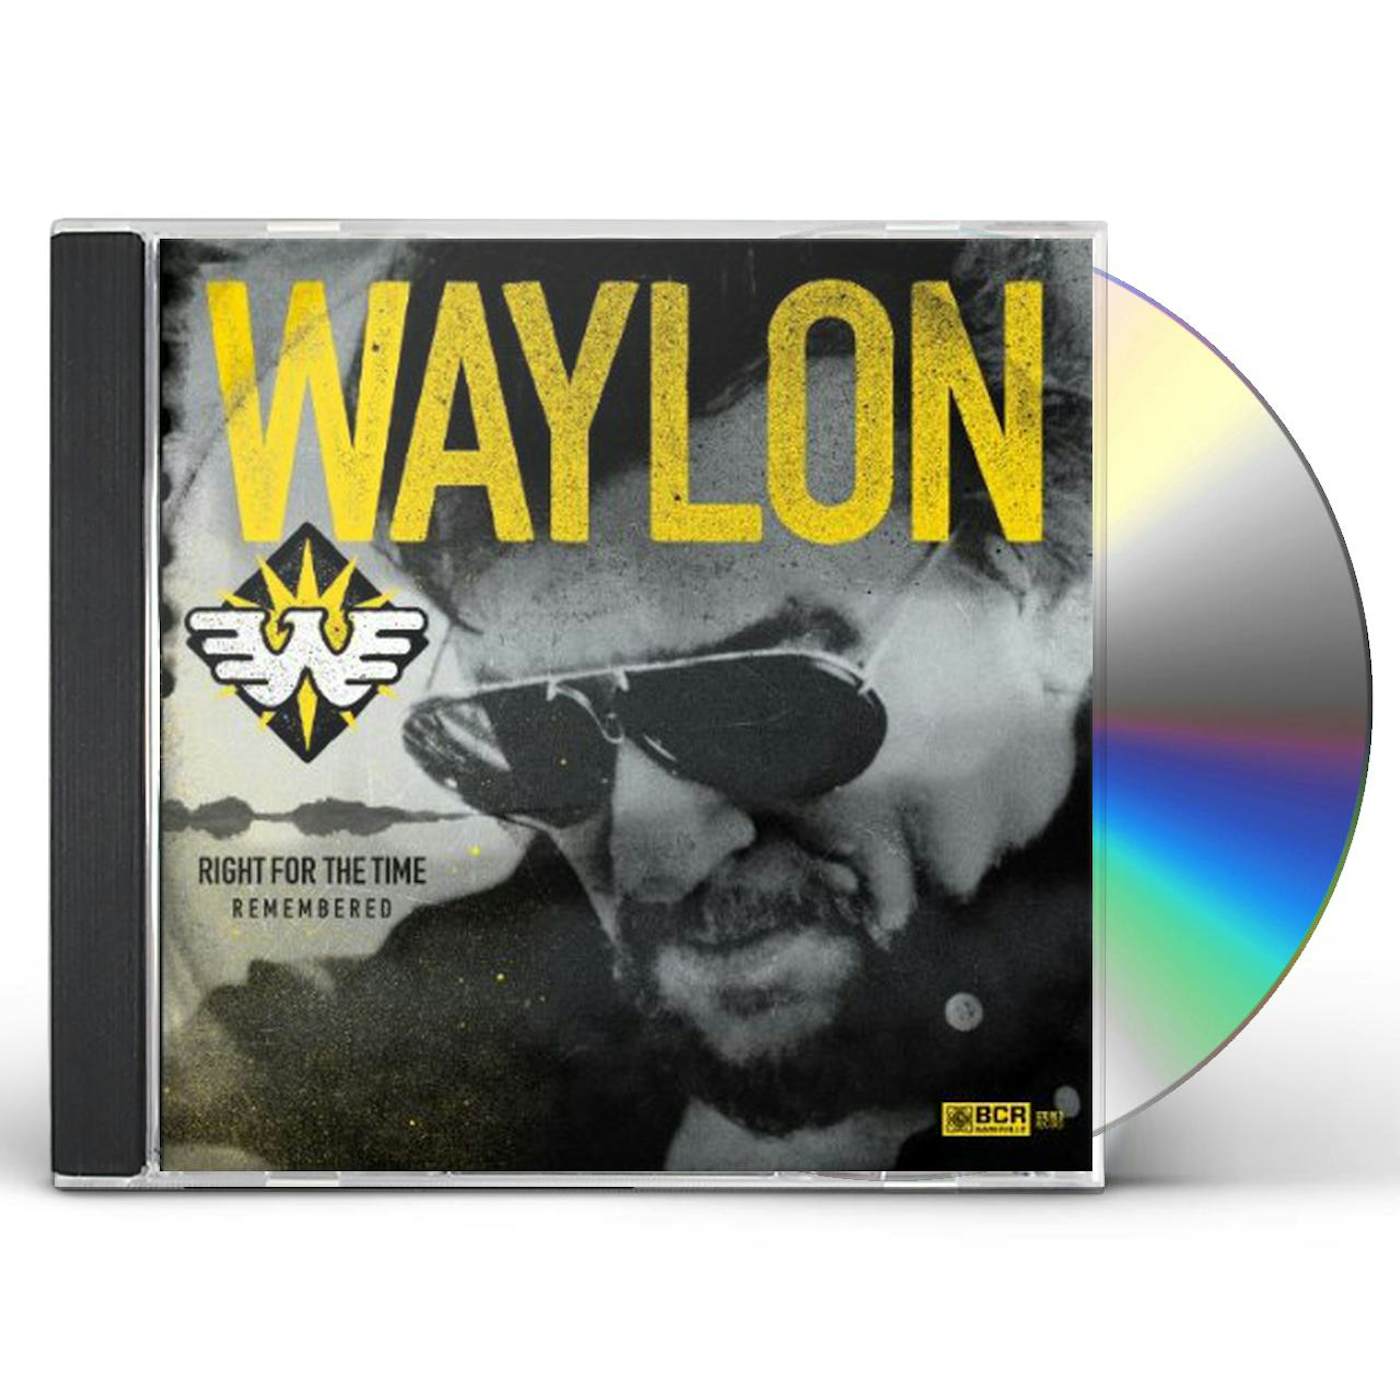 Waylon Jennings RIGHT FOR THE TIME (REMEMBERED) CD